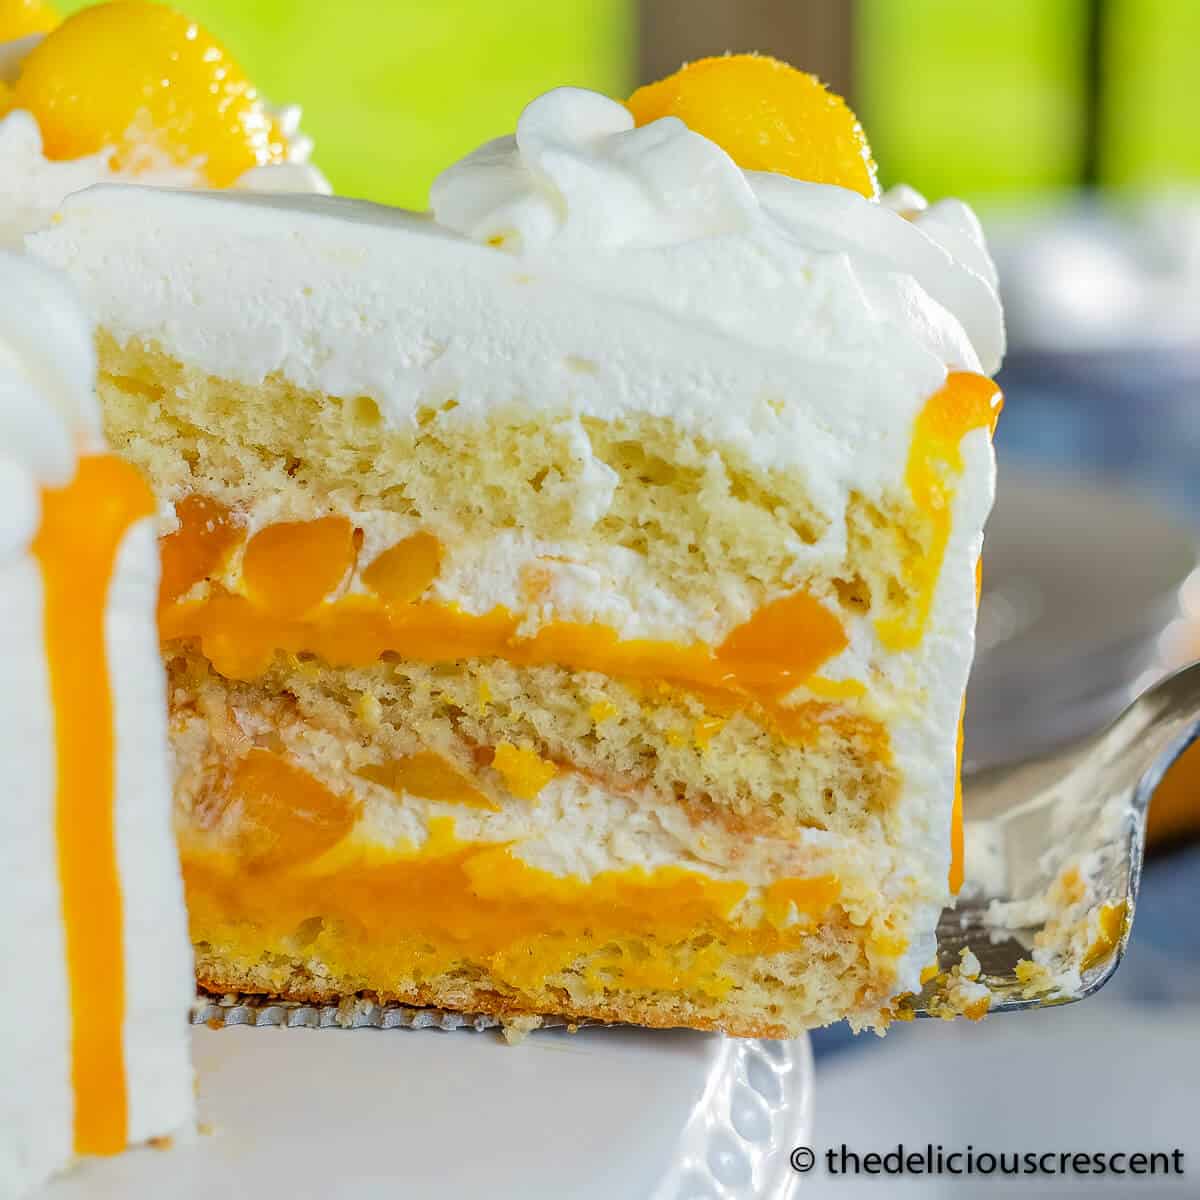 Mango Cake With Whipped Cream - The Delicious Crescent